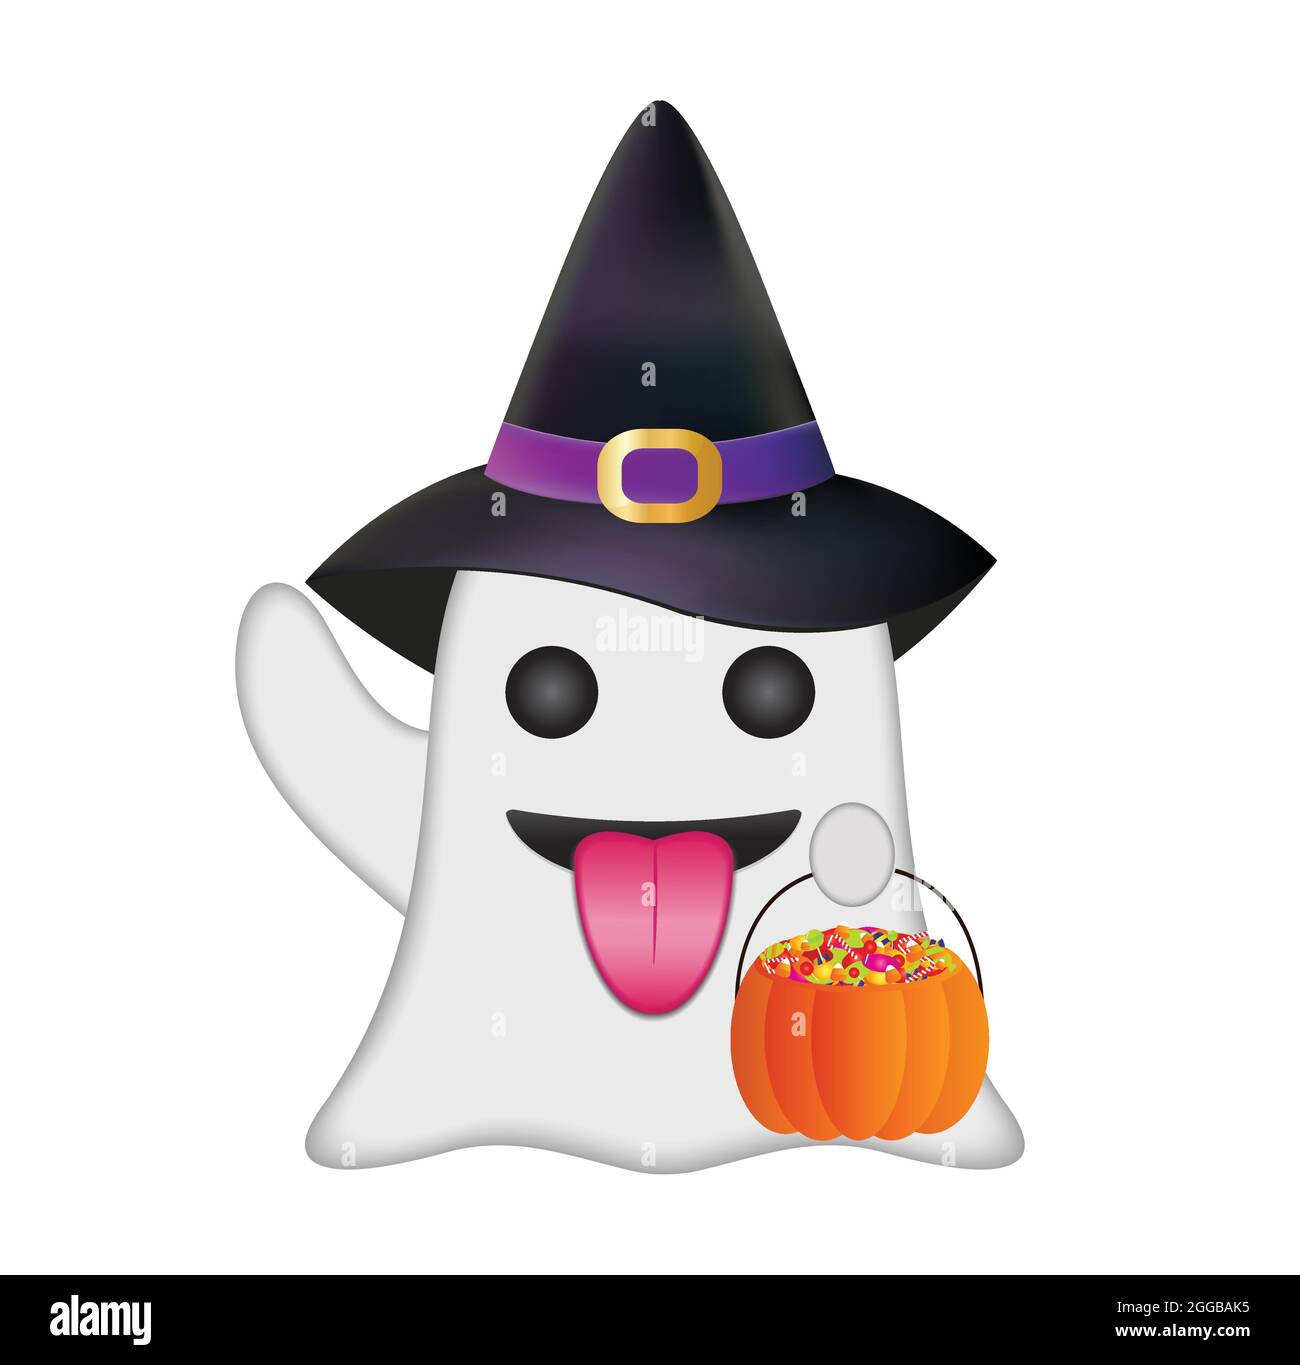 Ghost emoji vector illustration isolated. Halloween ghost emoticon on white background. Stock Vector